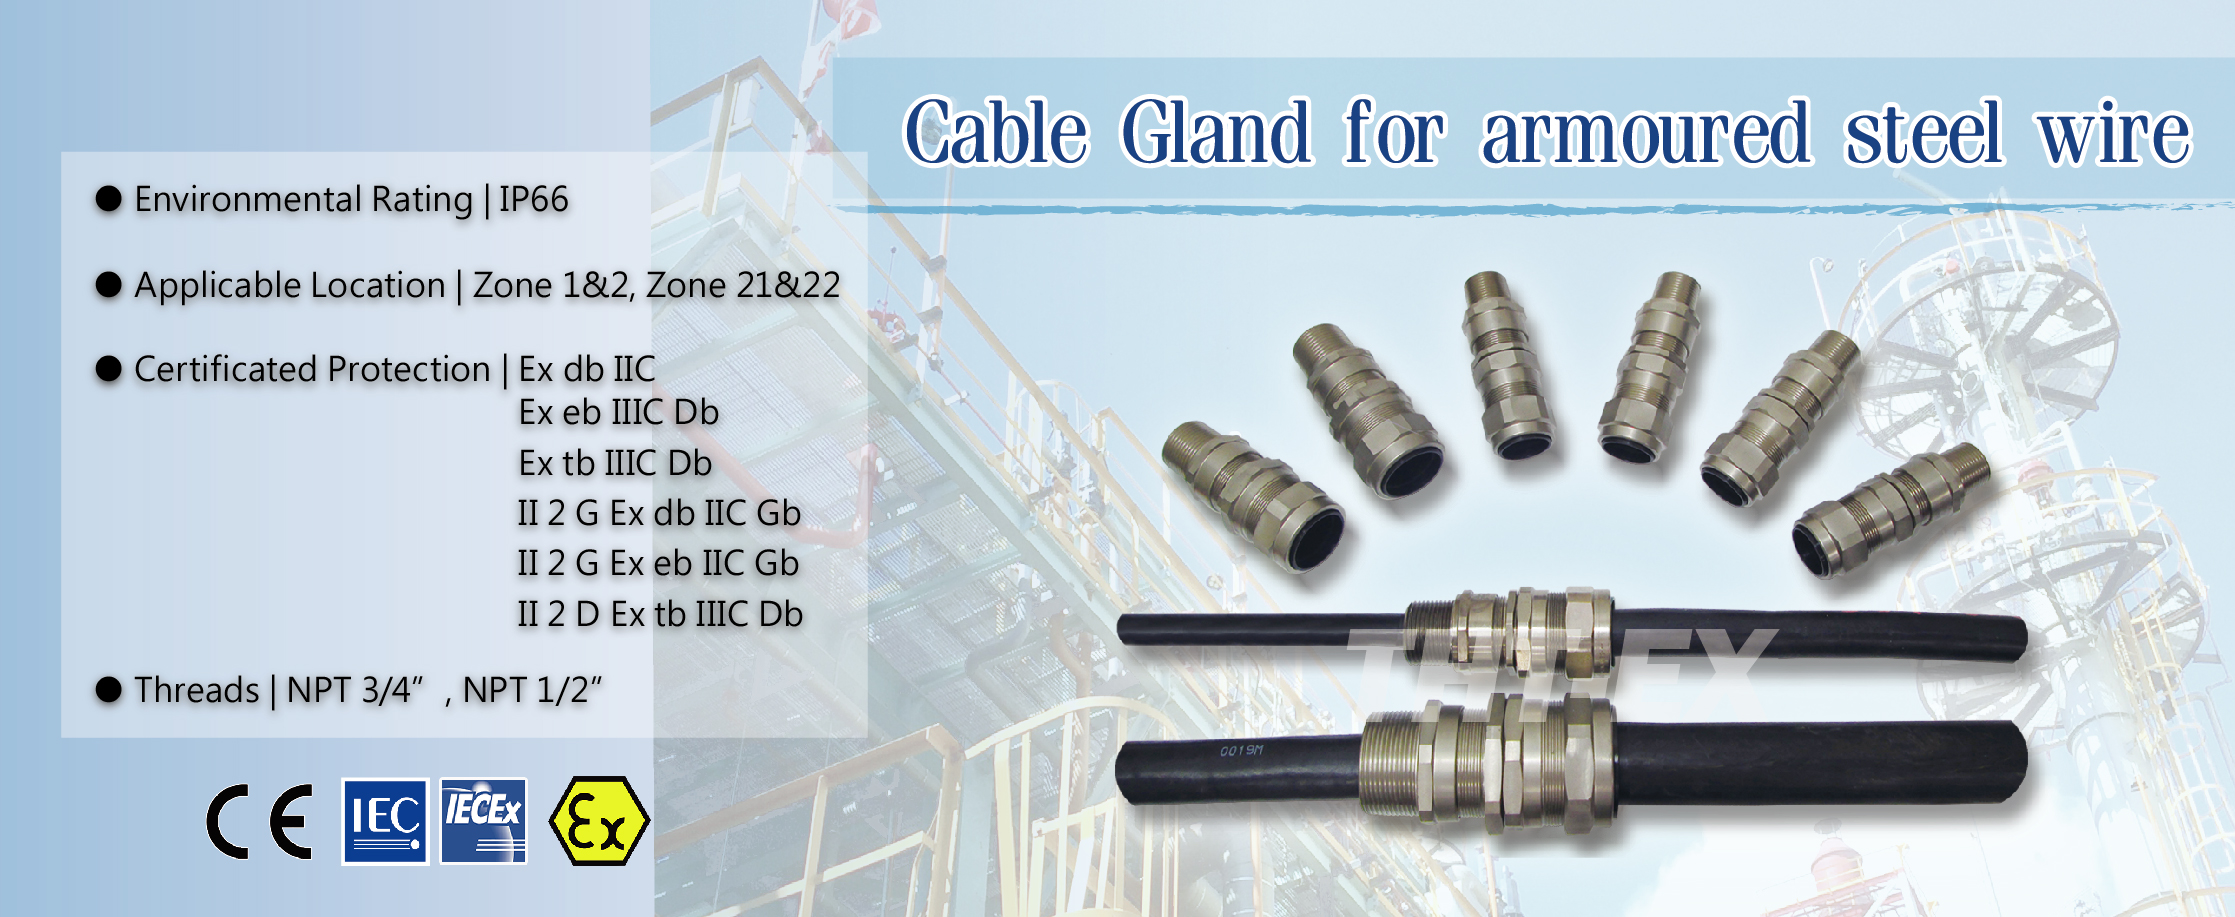 THT-EX's two types of explosion-proof cable gland for armored steel wire.